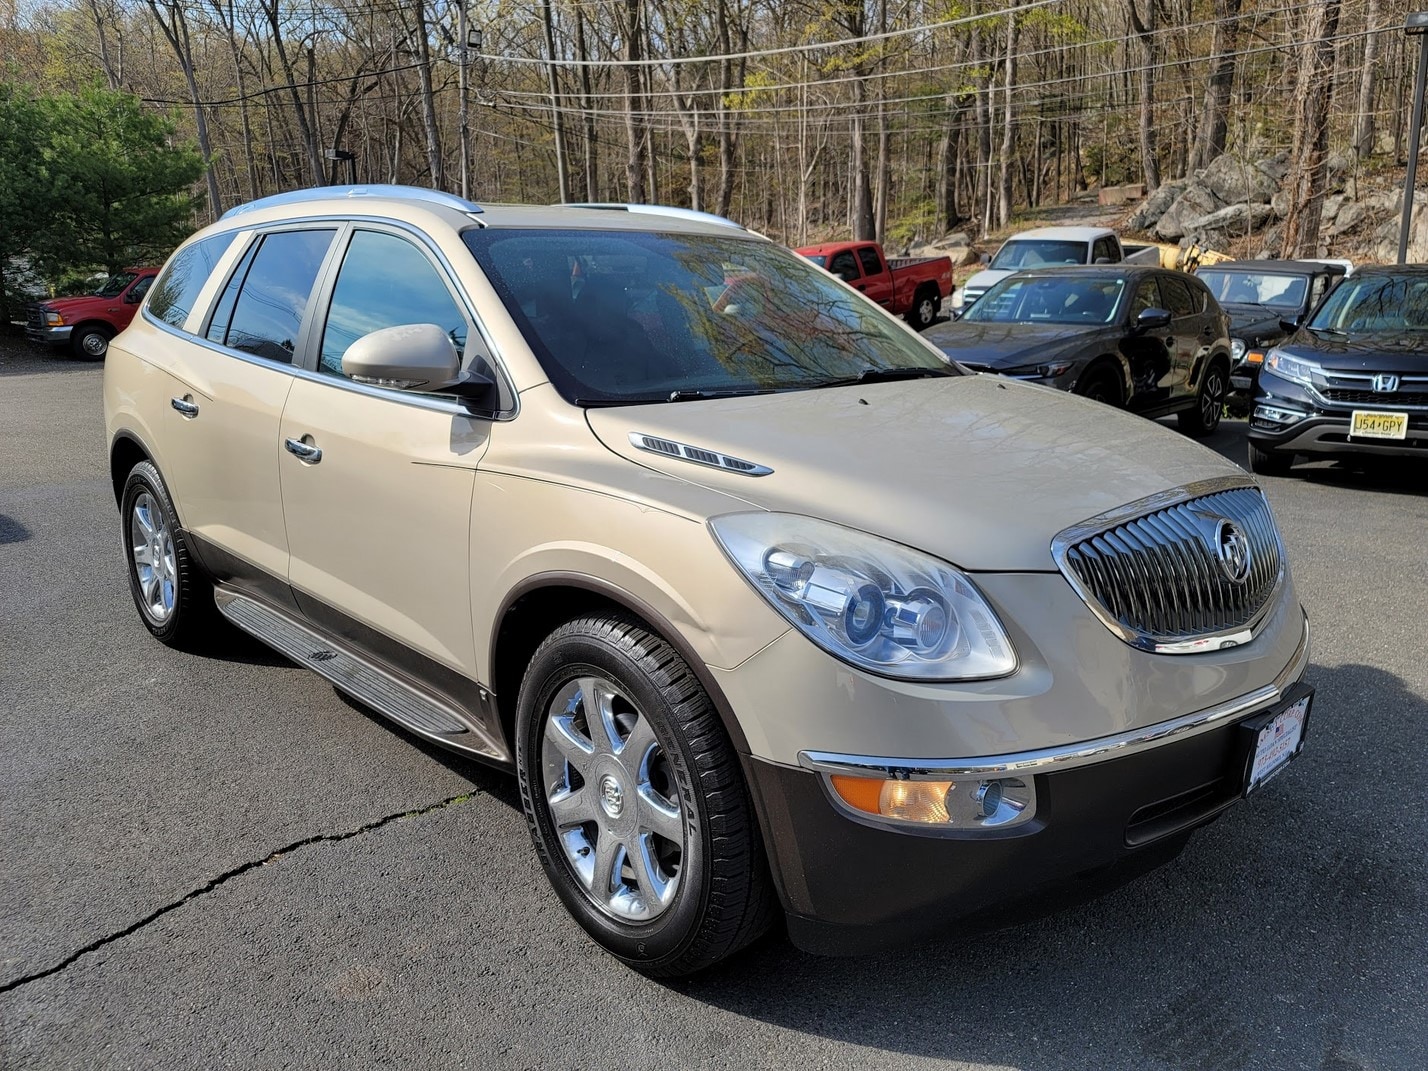 Used 2009 Buick Enclave For Sale at Ramsey Corp. | VIN: 5GAEV23DX9J180291